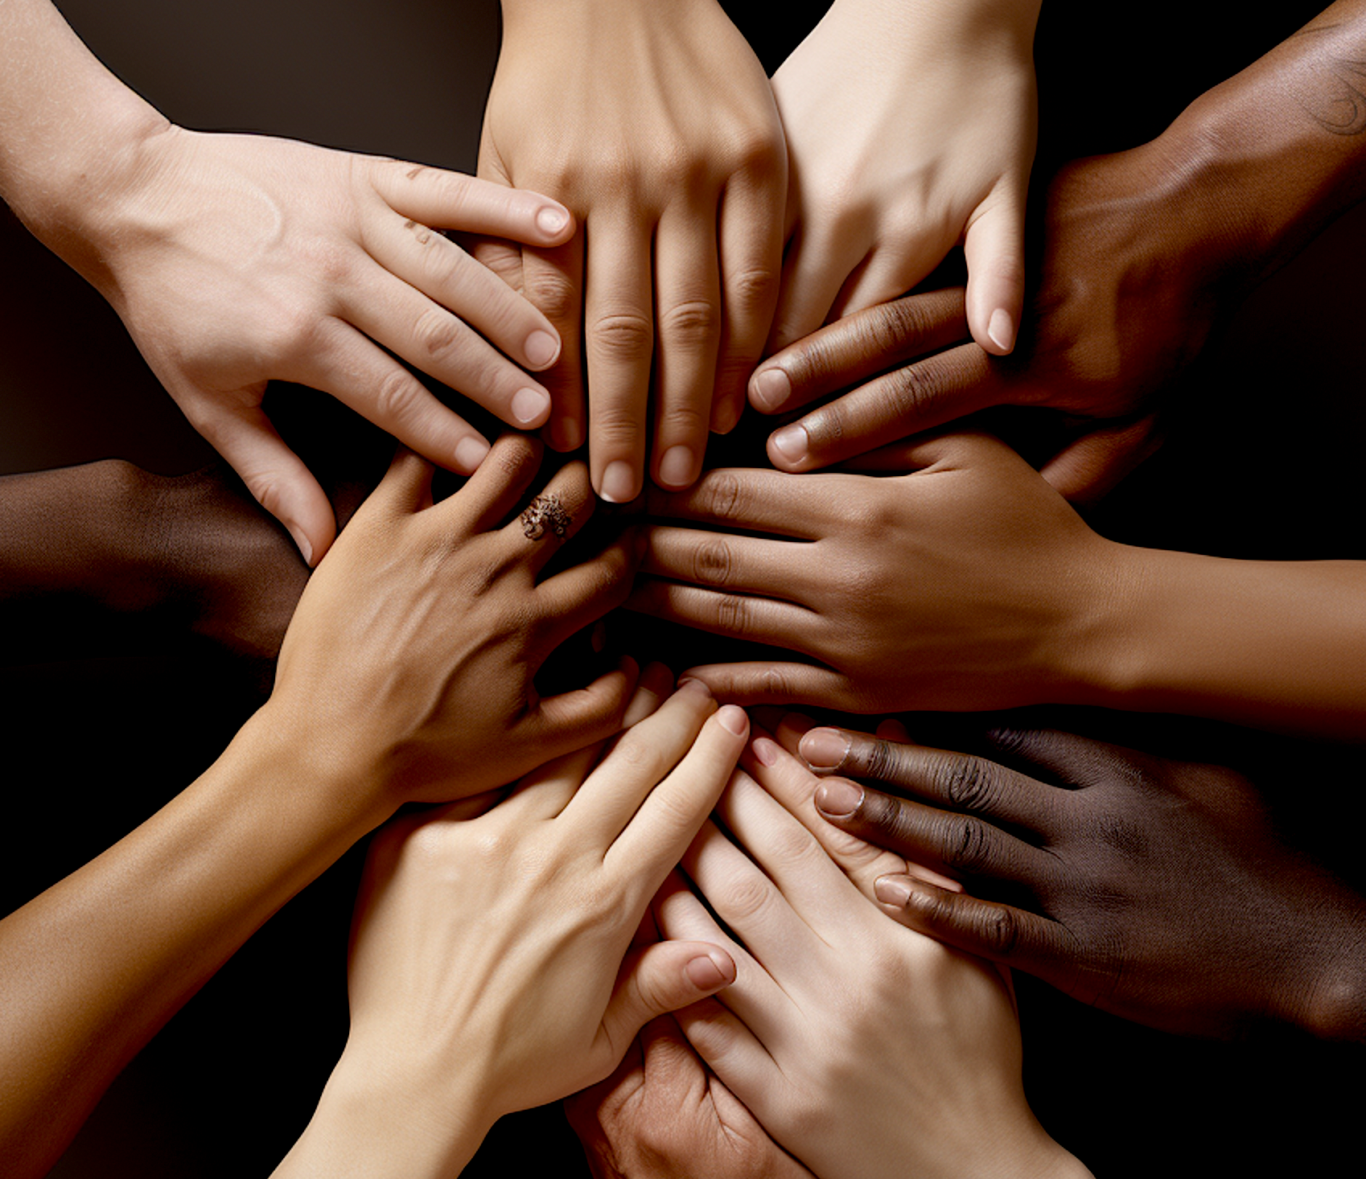 Image of multiple hands of varying shades of skin color clasping each other in support. Image produced using Midjourney.